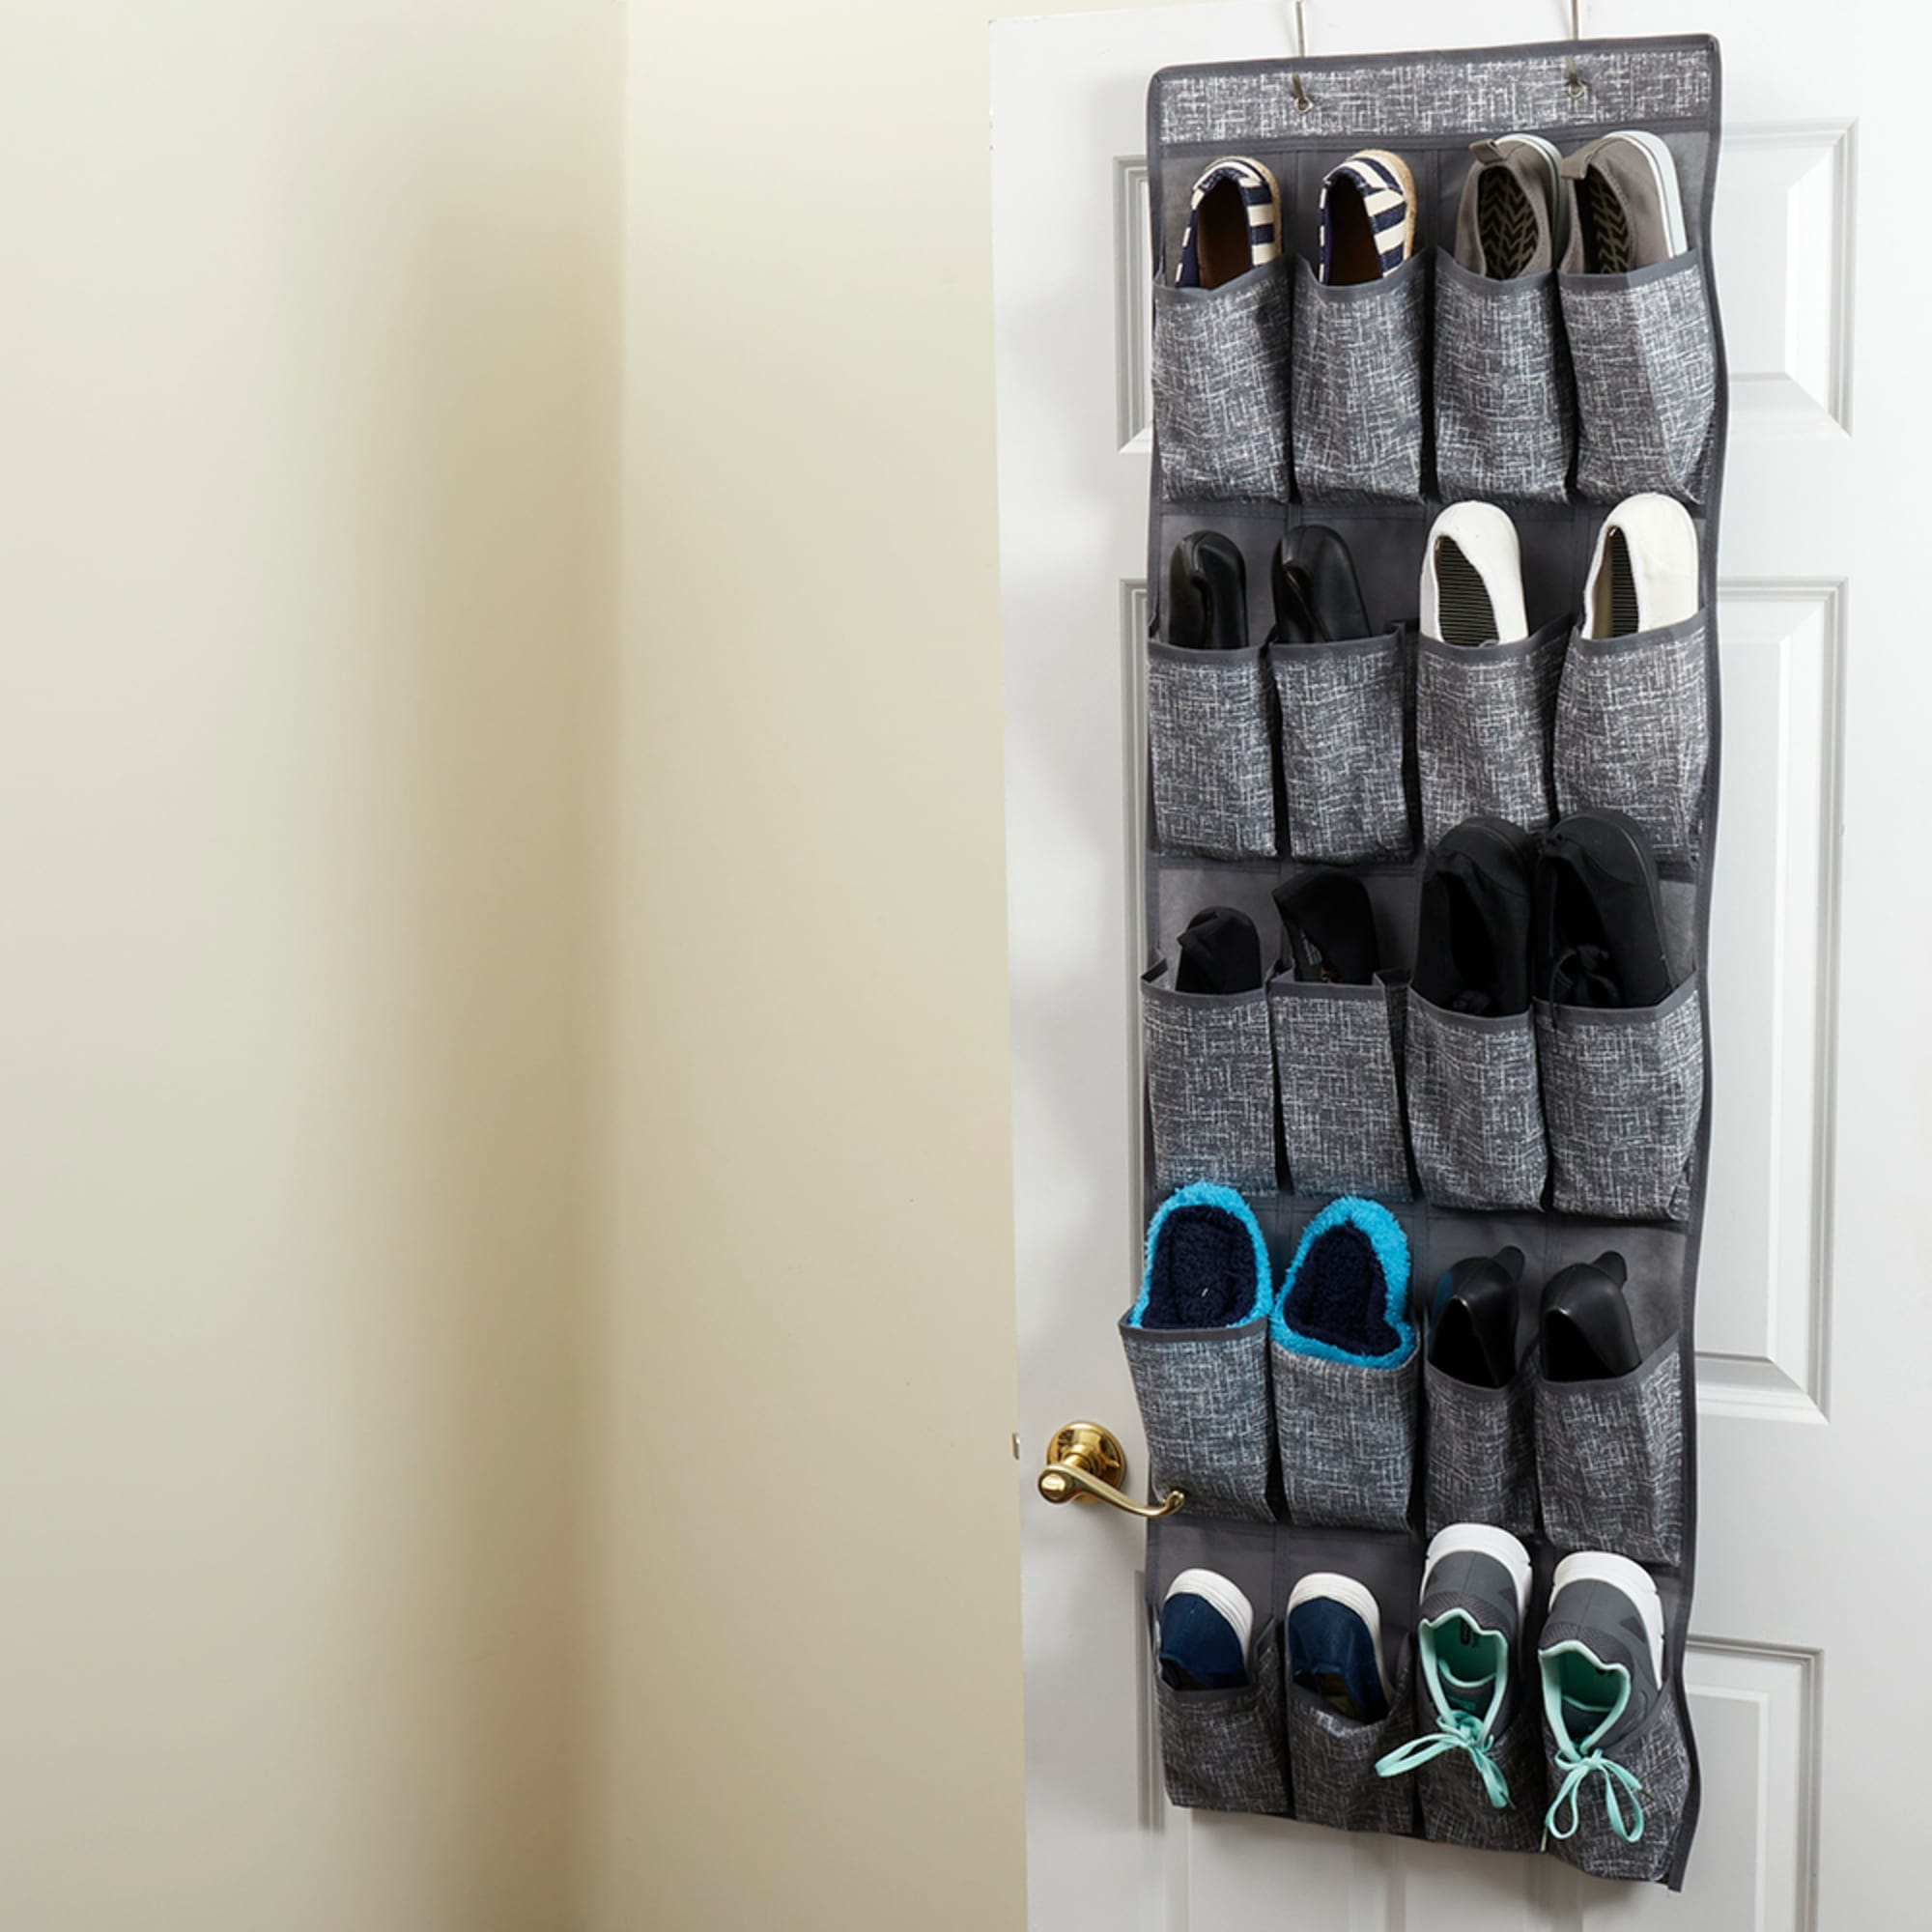 Home Basics Graph Line 20 Pocket Non-Woven Over the Door Shoe Organizer $5.00 EACH, CASE PACK OF 12